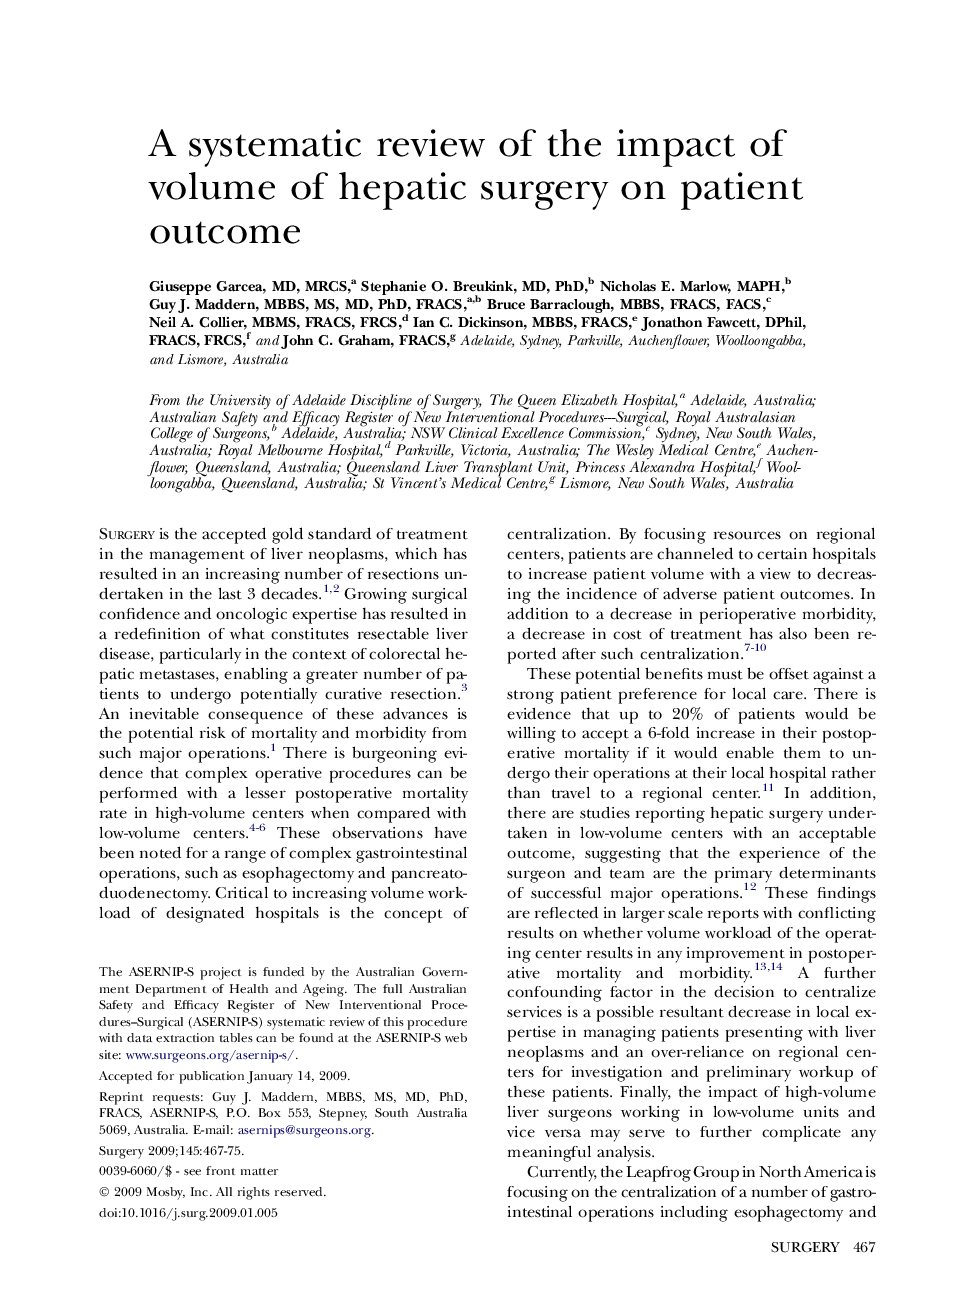 A systematic review of the impact of volume of hepatic surgery on patient outcome